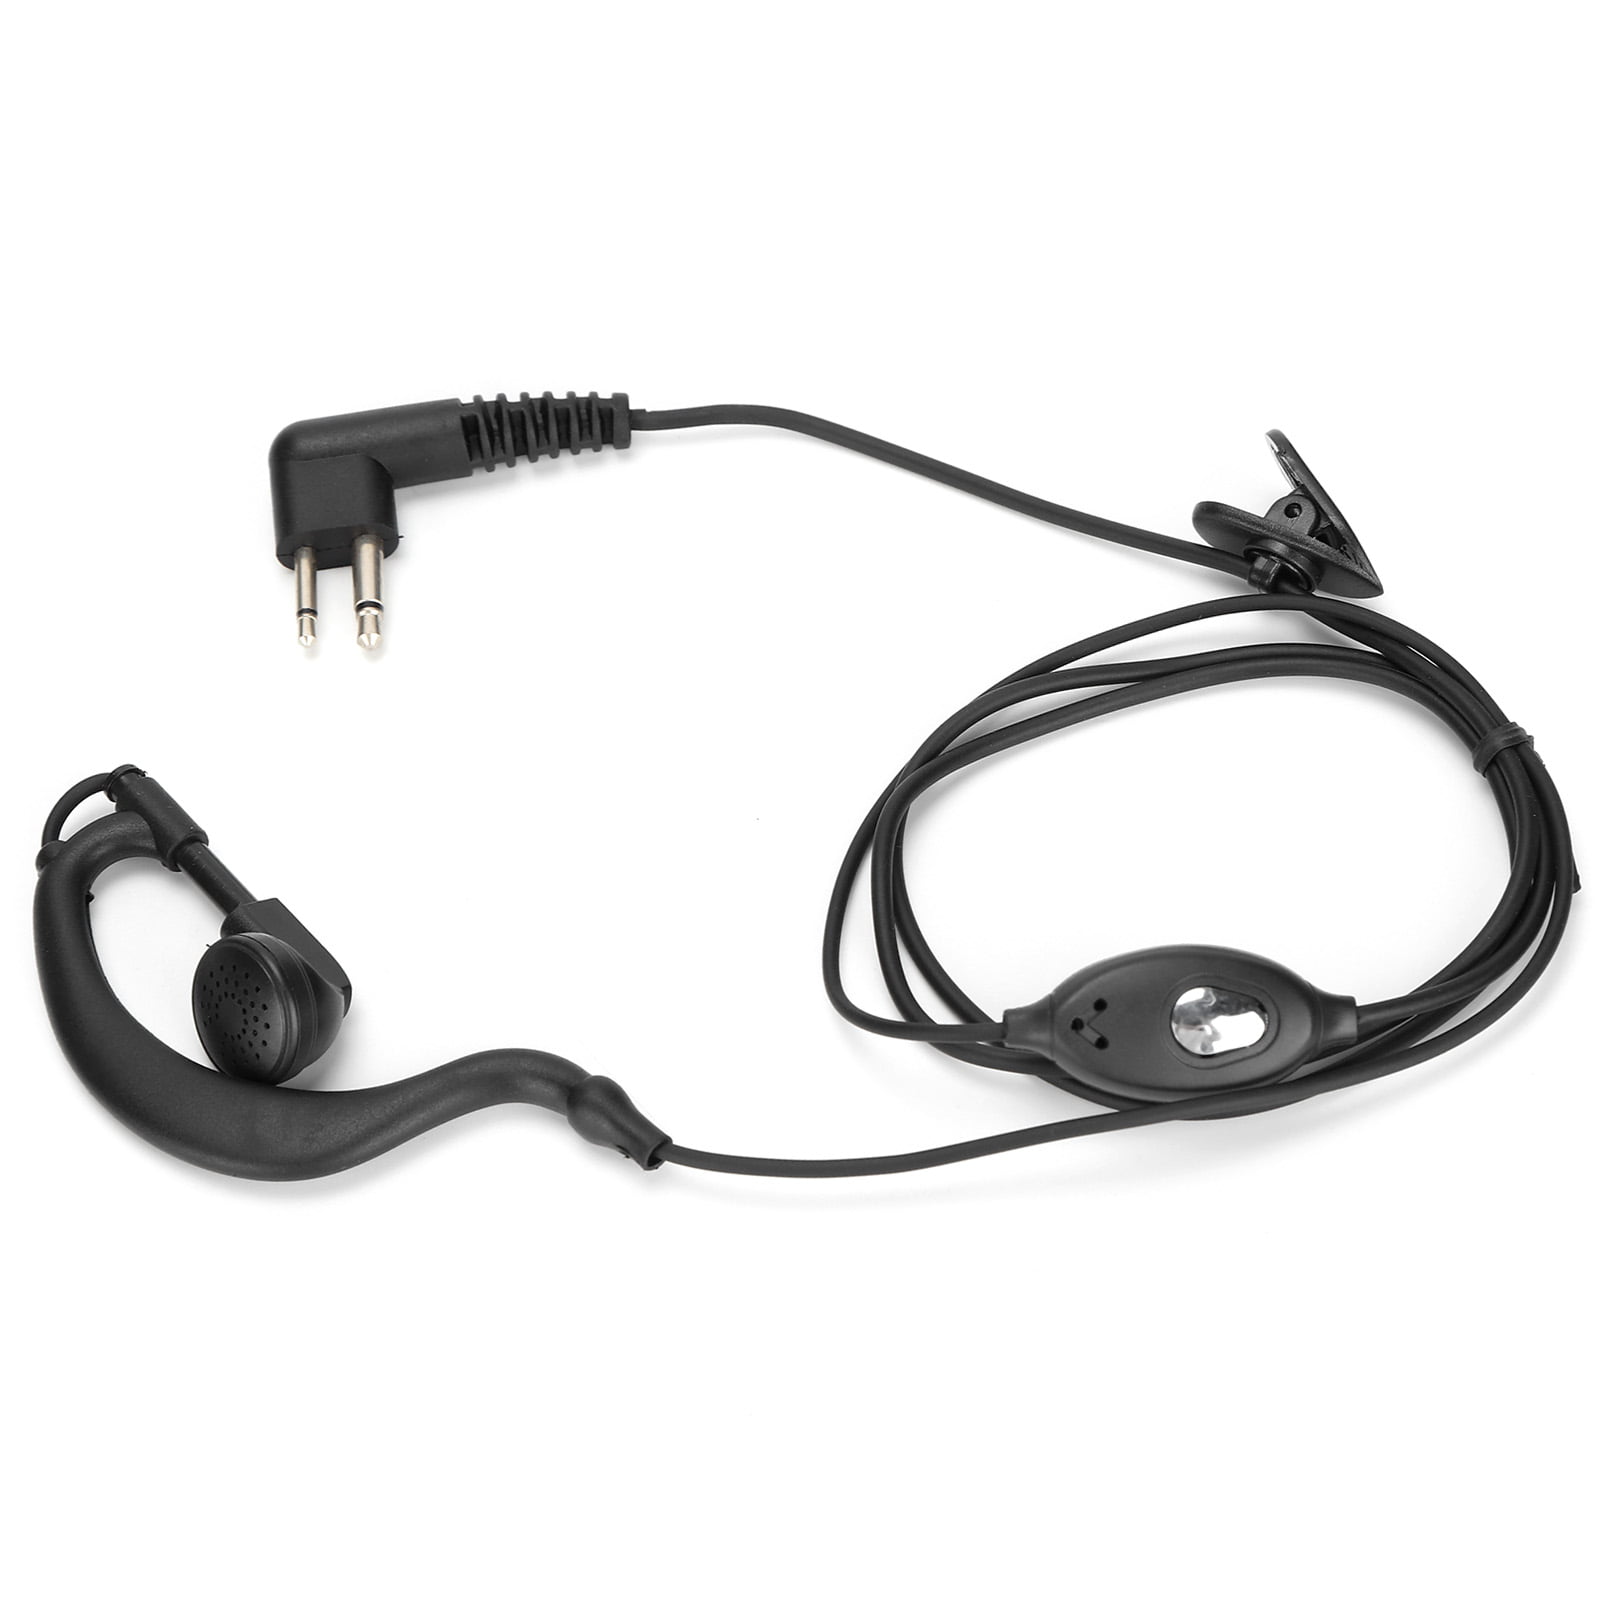 Details about   2 Pin PTT Throat Mic Earpiece Headset for KENWOOD TYT HYT BAOFENG UV5R 888S Hot 